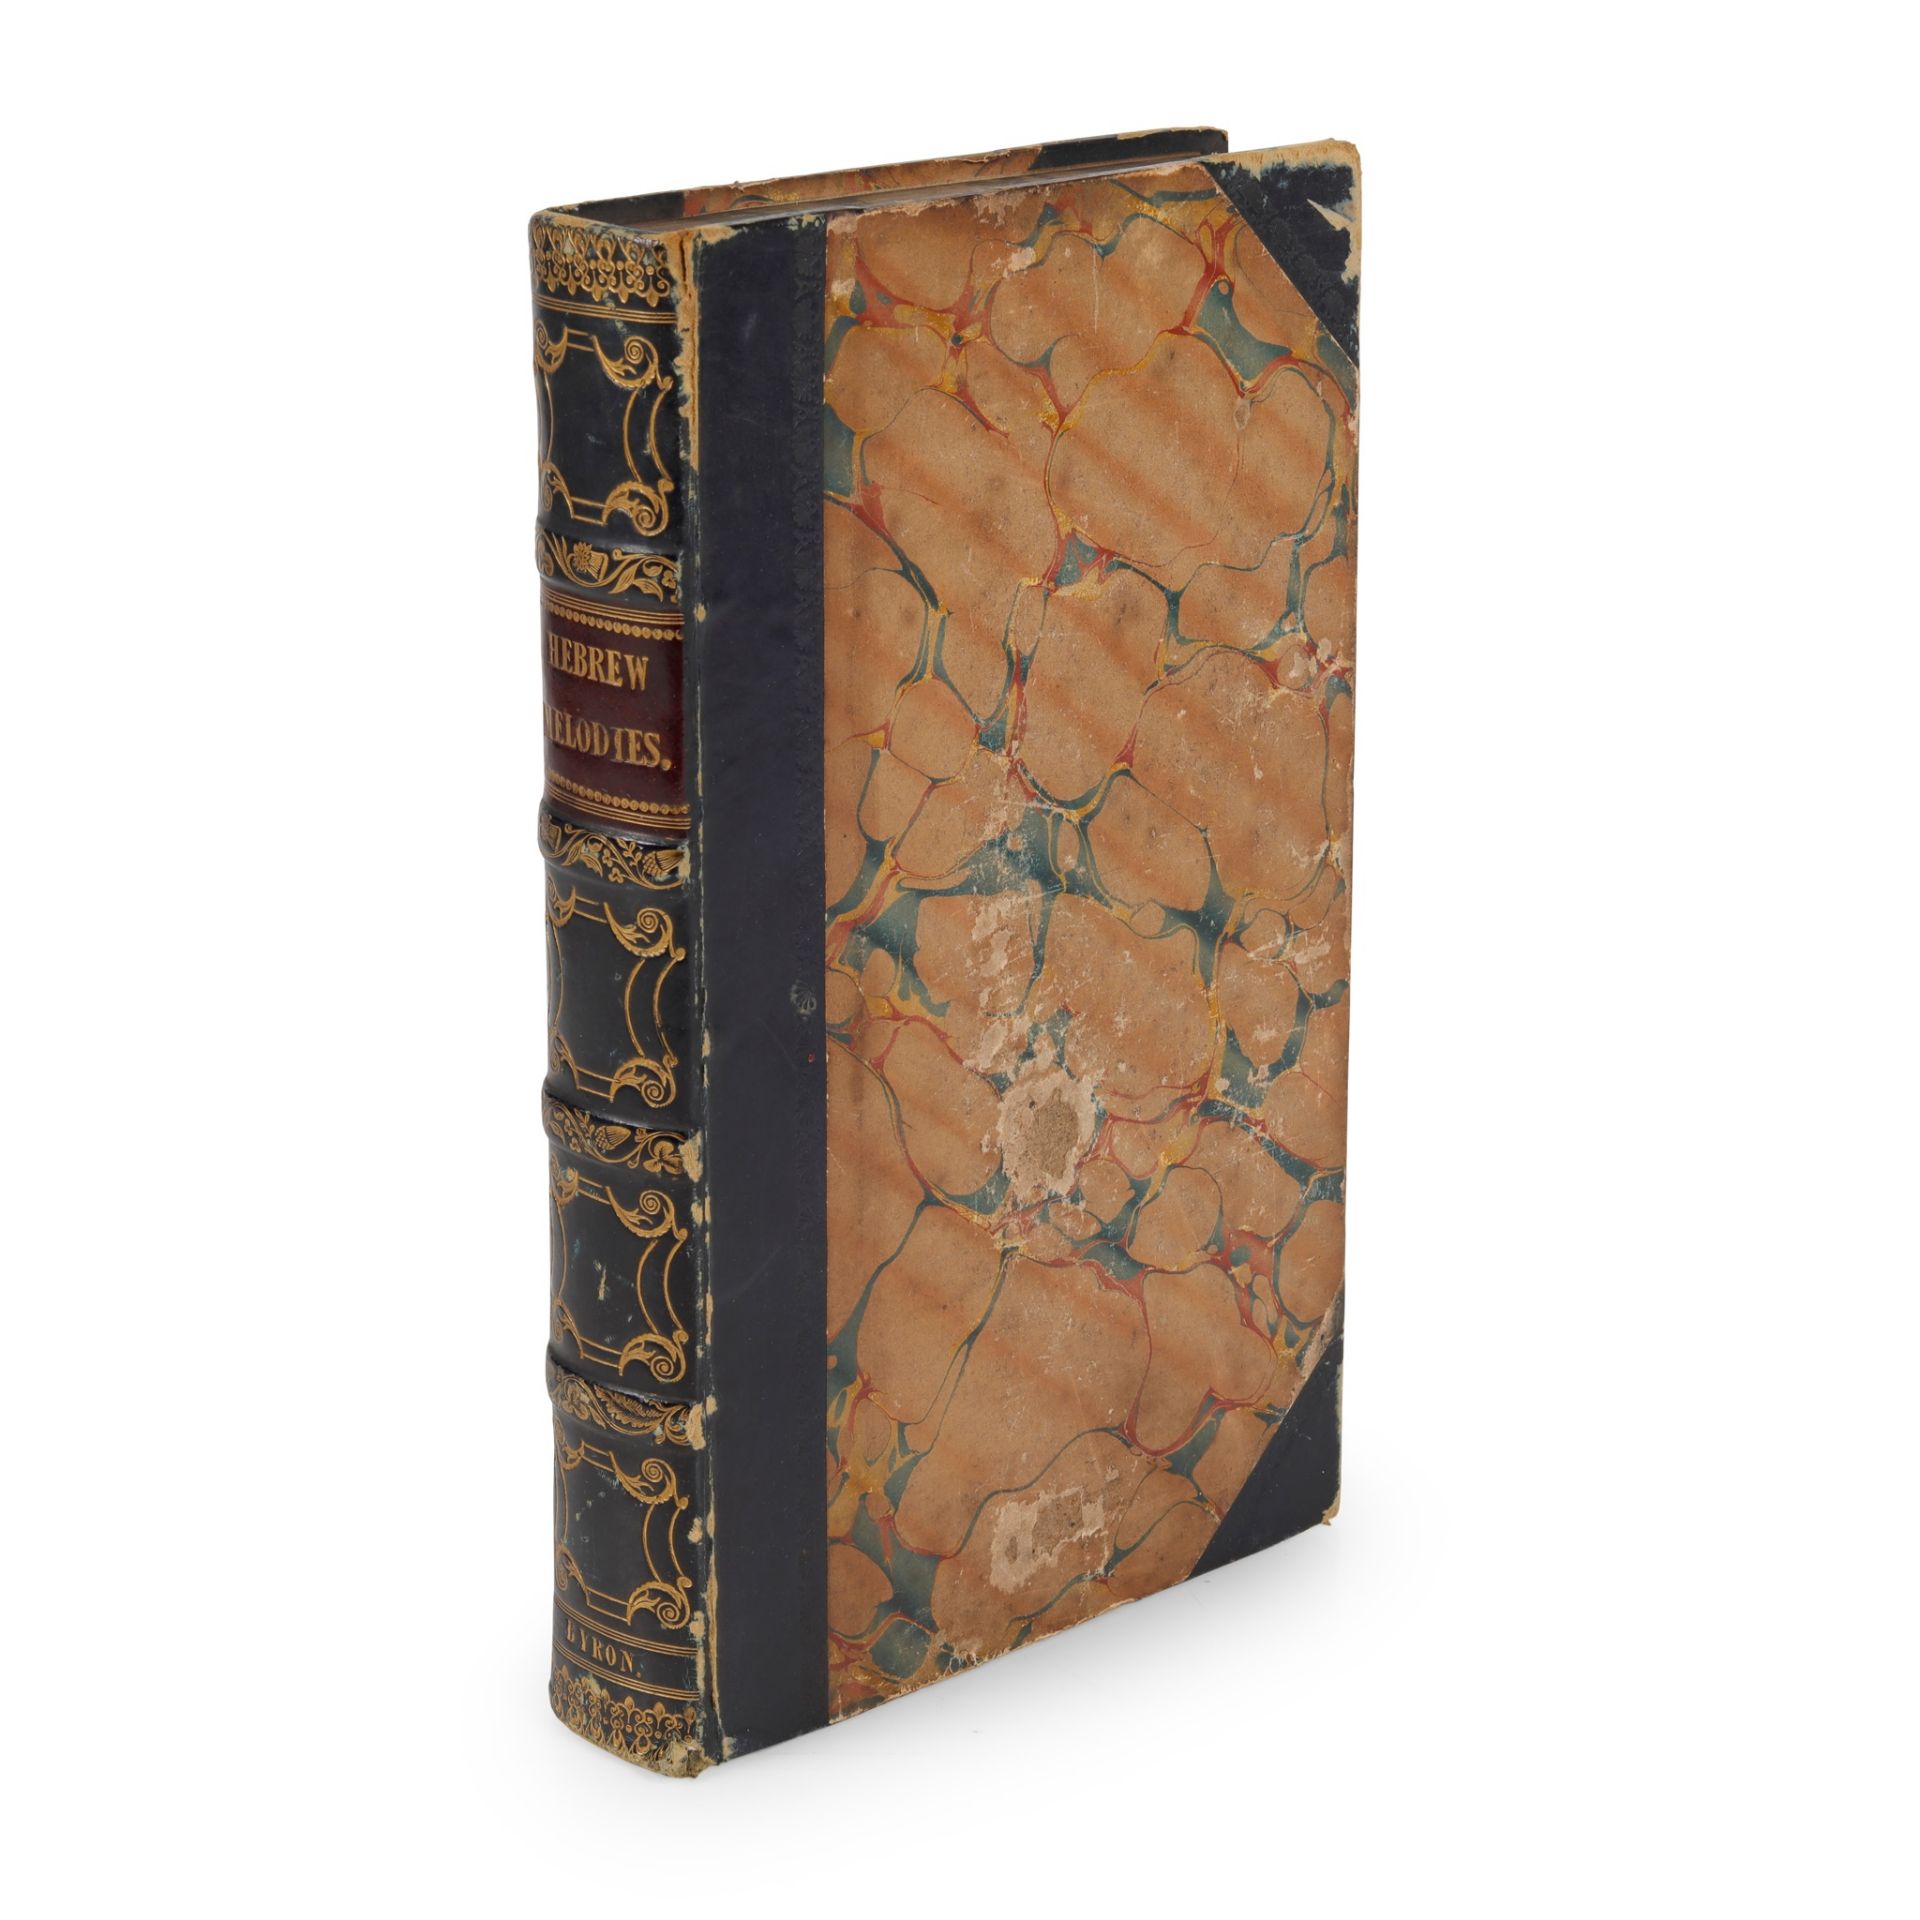 Byron, George Gordon, Lord Collected volume of works, comprising